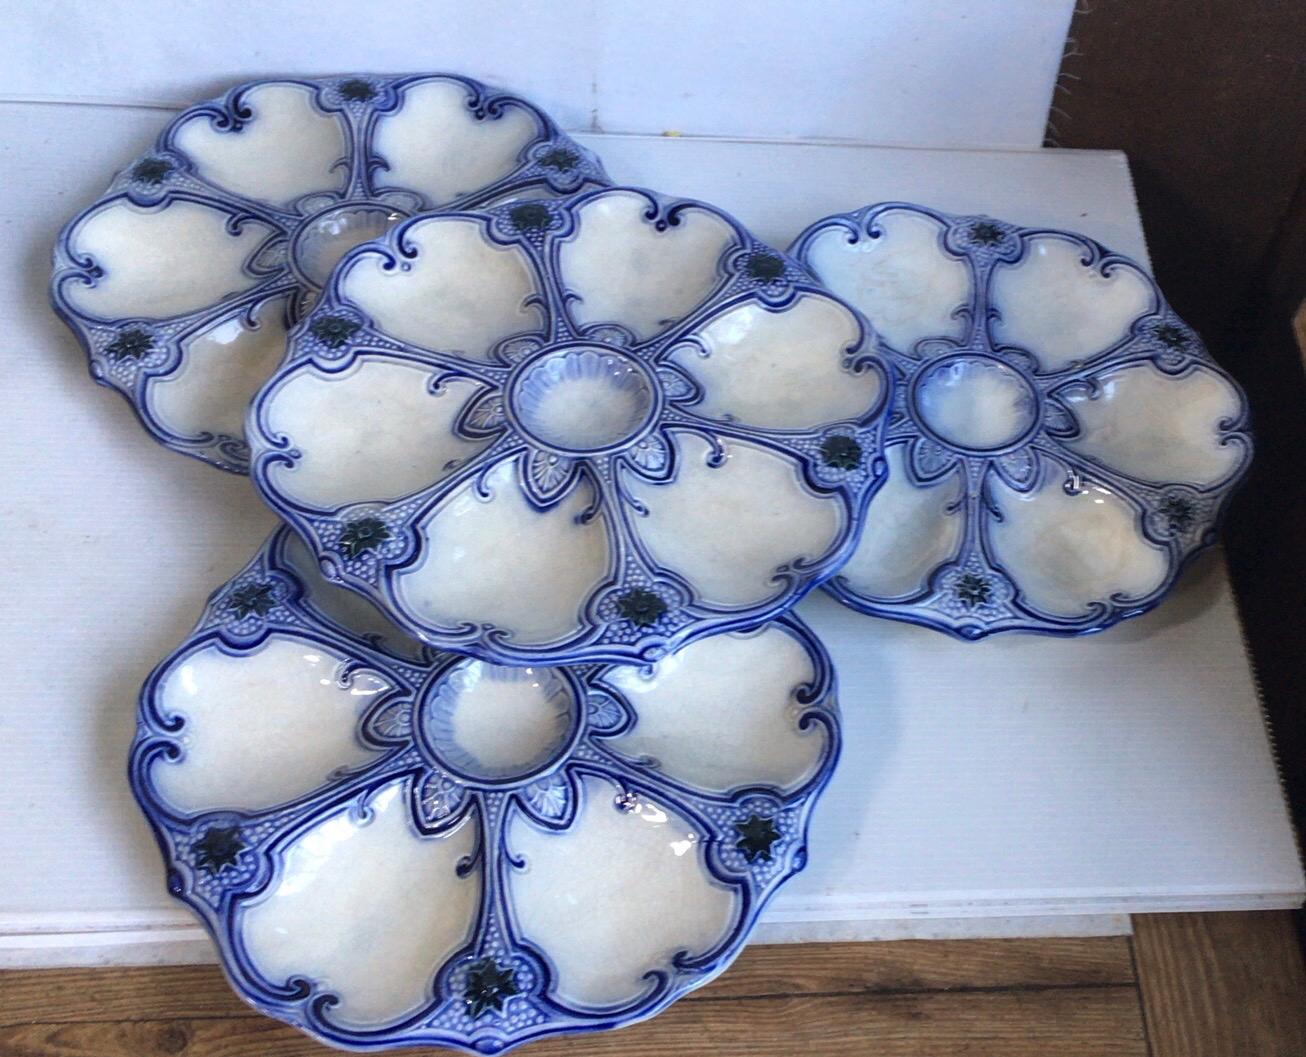 19th Century Majolica blue and white oyster plate Wasmuel.
Reference / Page 48 